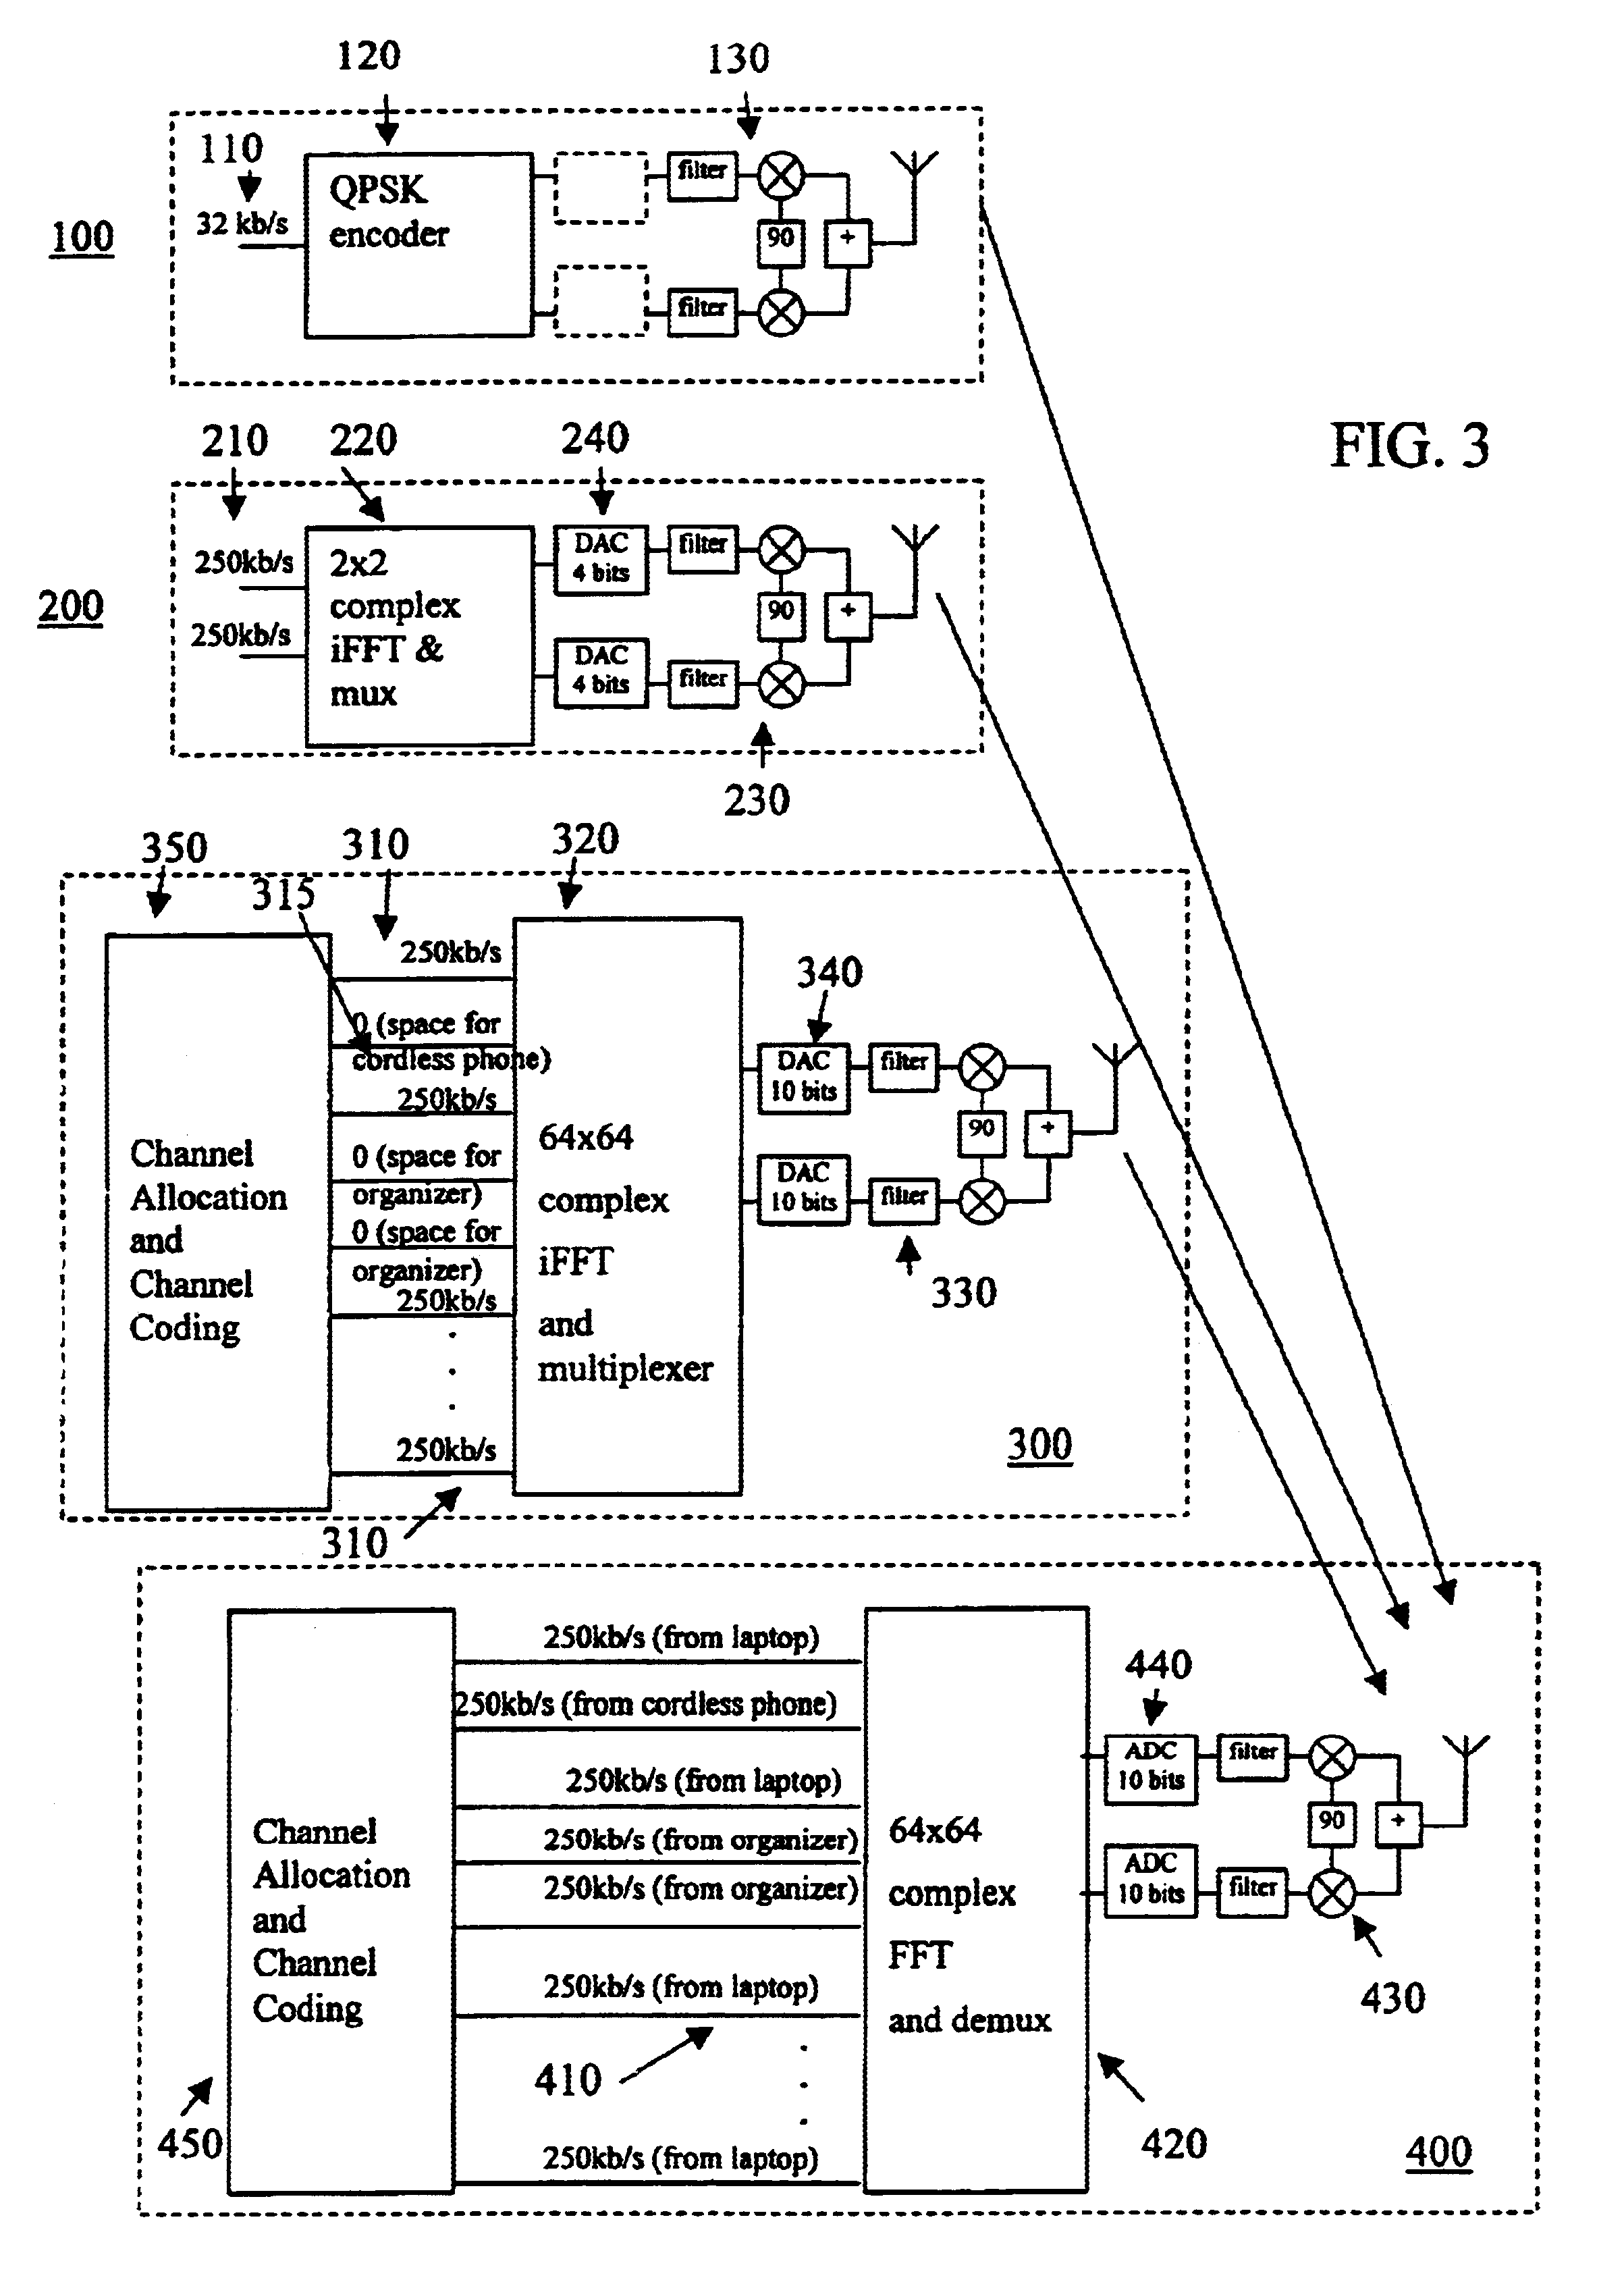 Scalable communication system using overlaid signals and multi-carrier frequency communication